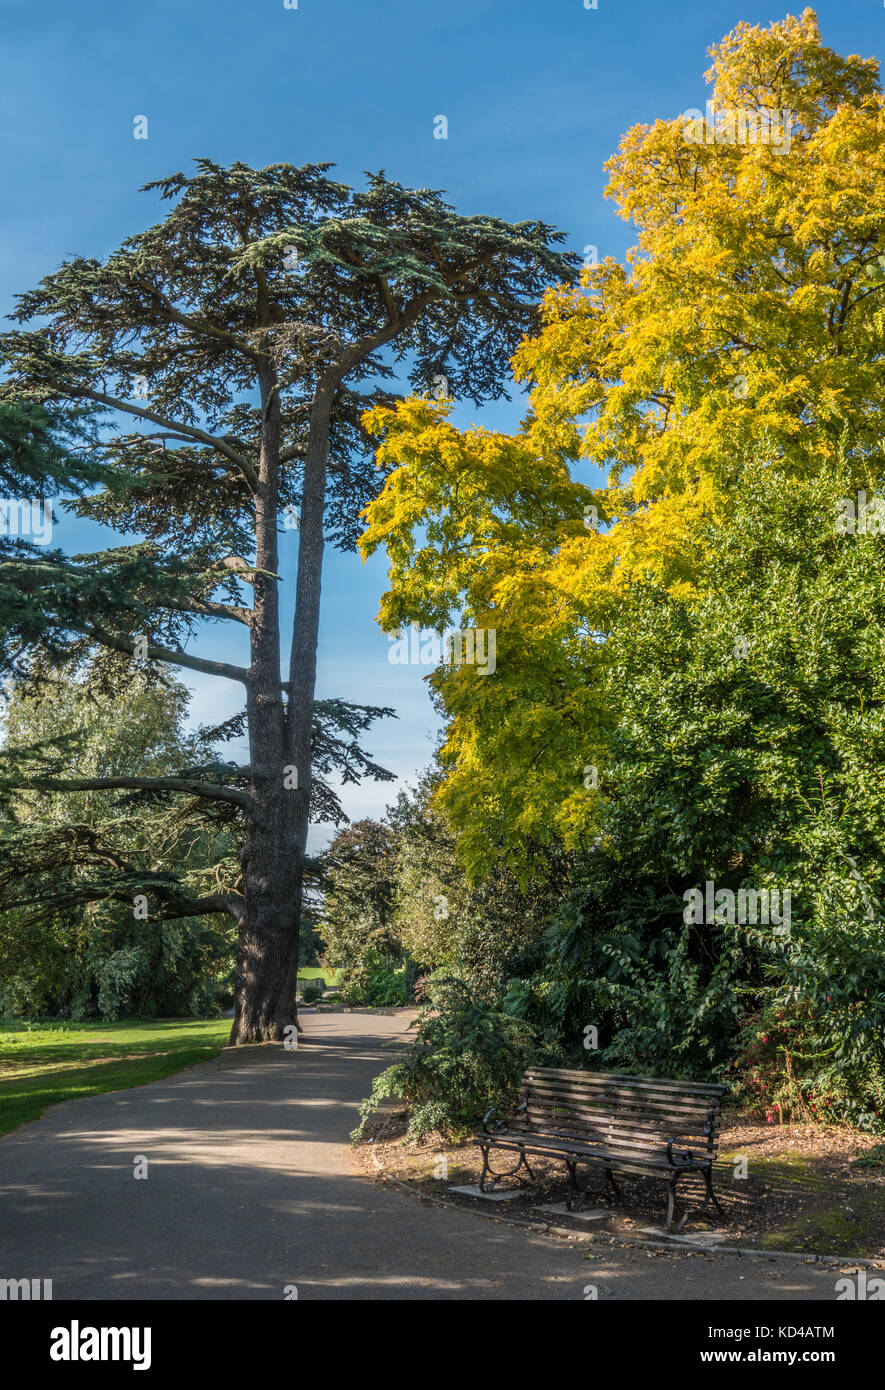 Peaceful scene of tall trees against a blue sky, in the early autumn sunshine, with nobody around, in Gunnersbury Park, West London, W3, England, UK. Stock Photo